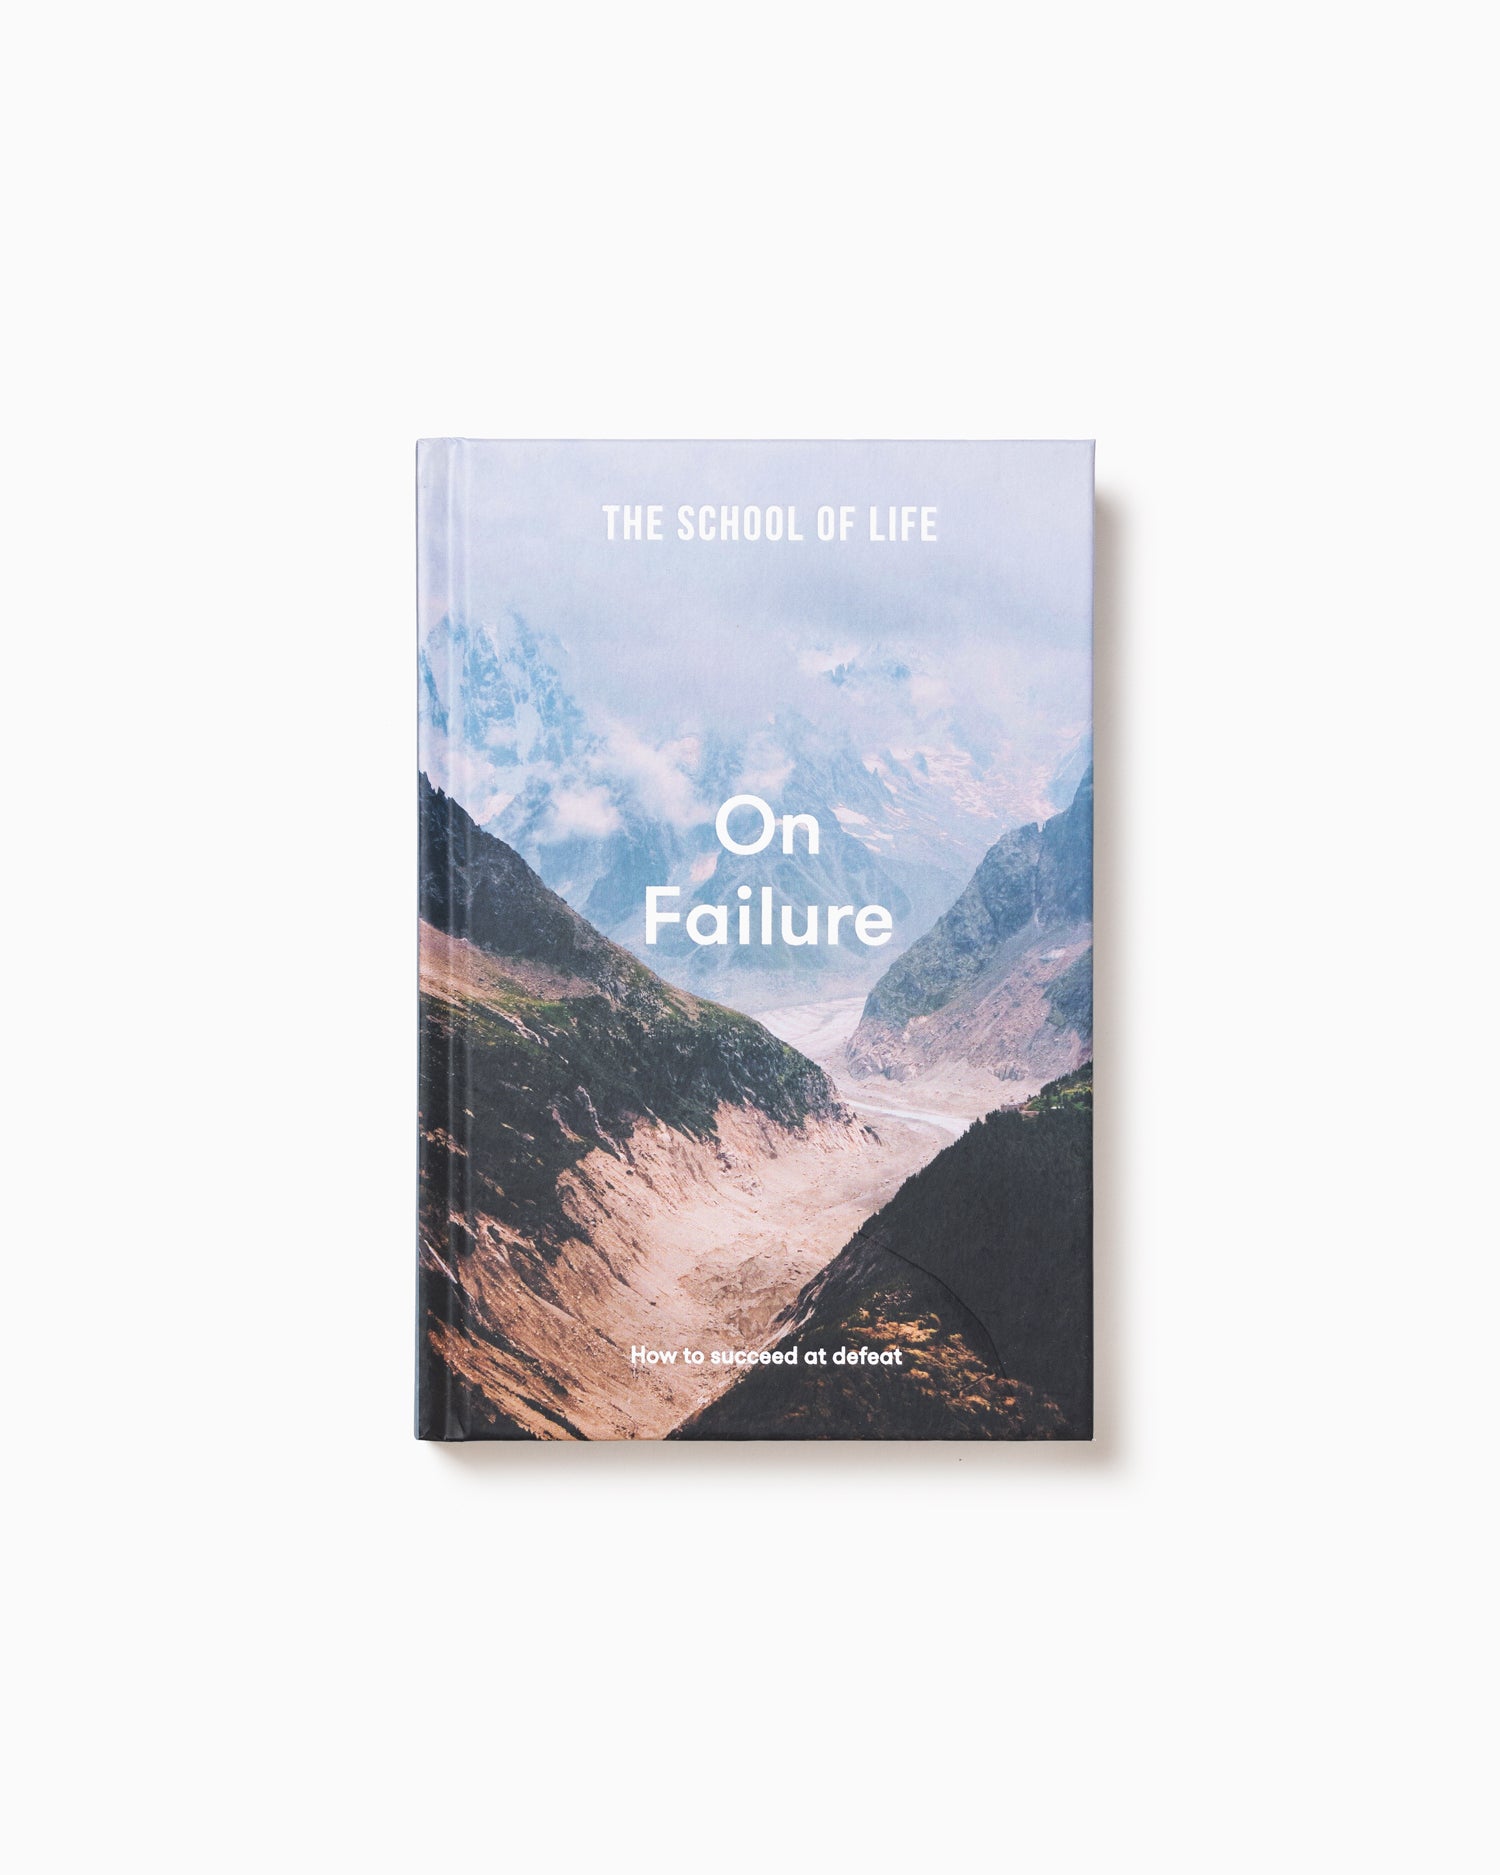 The School of Life: On Failure